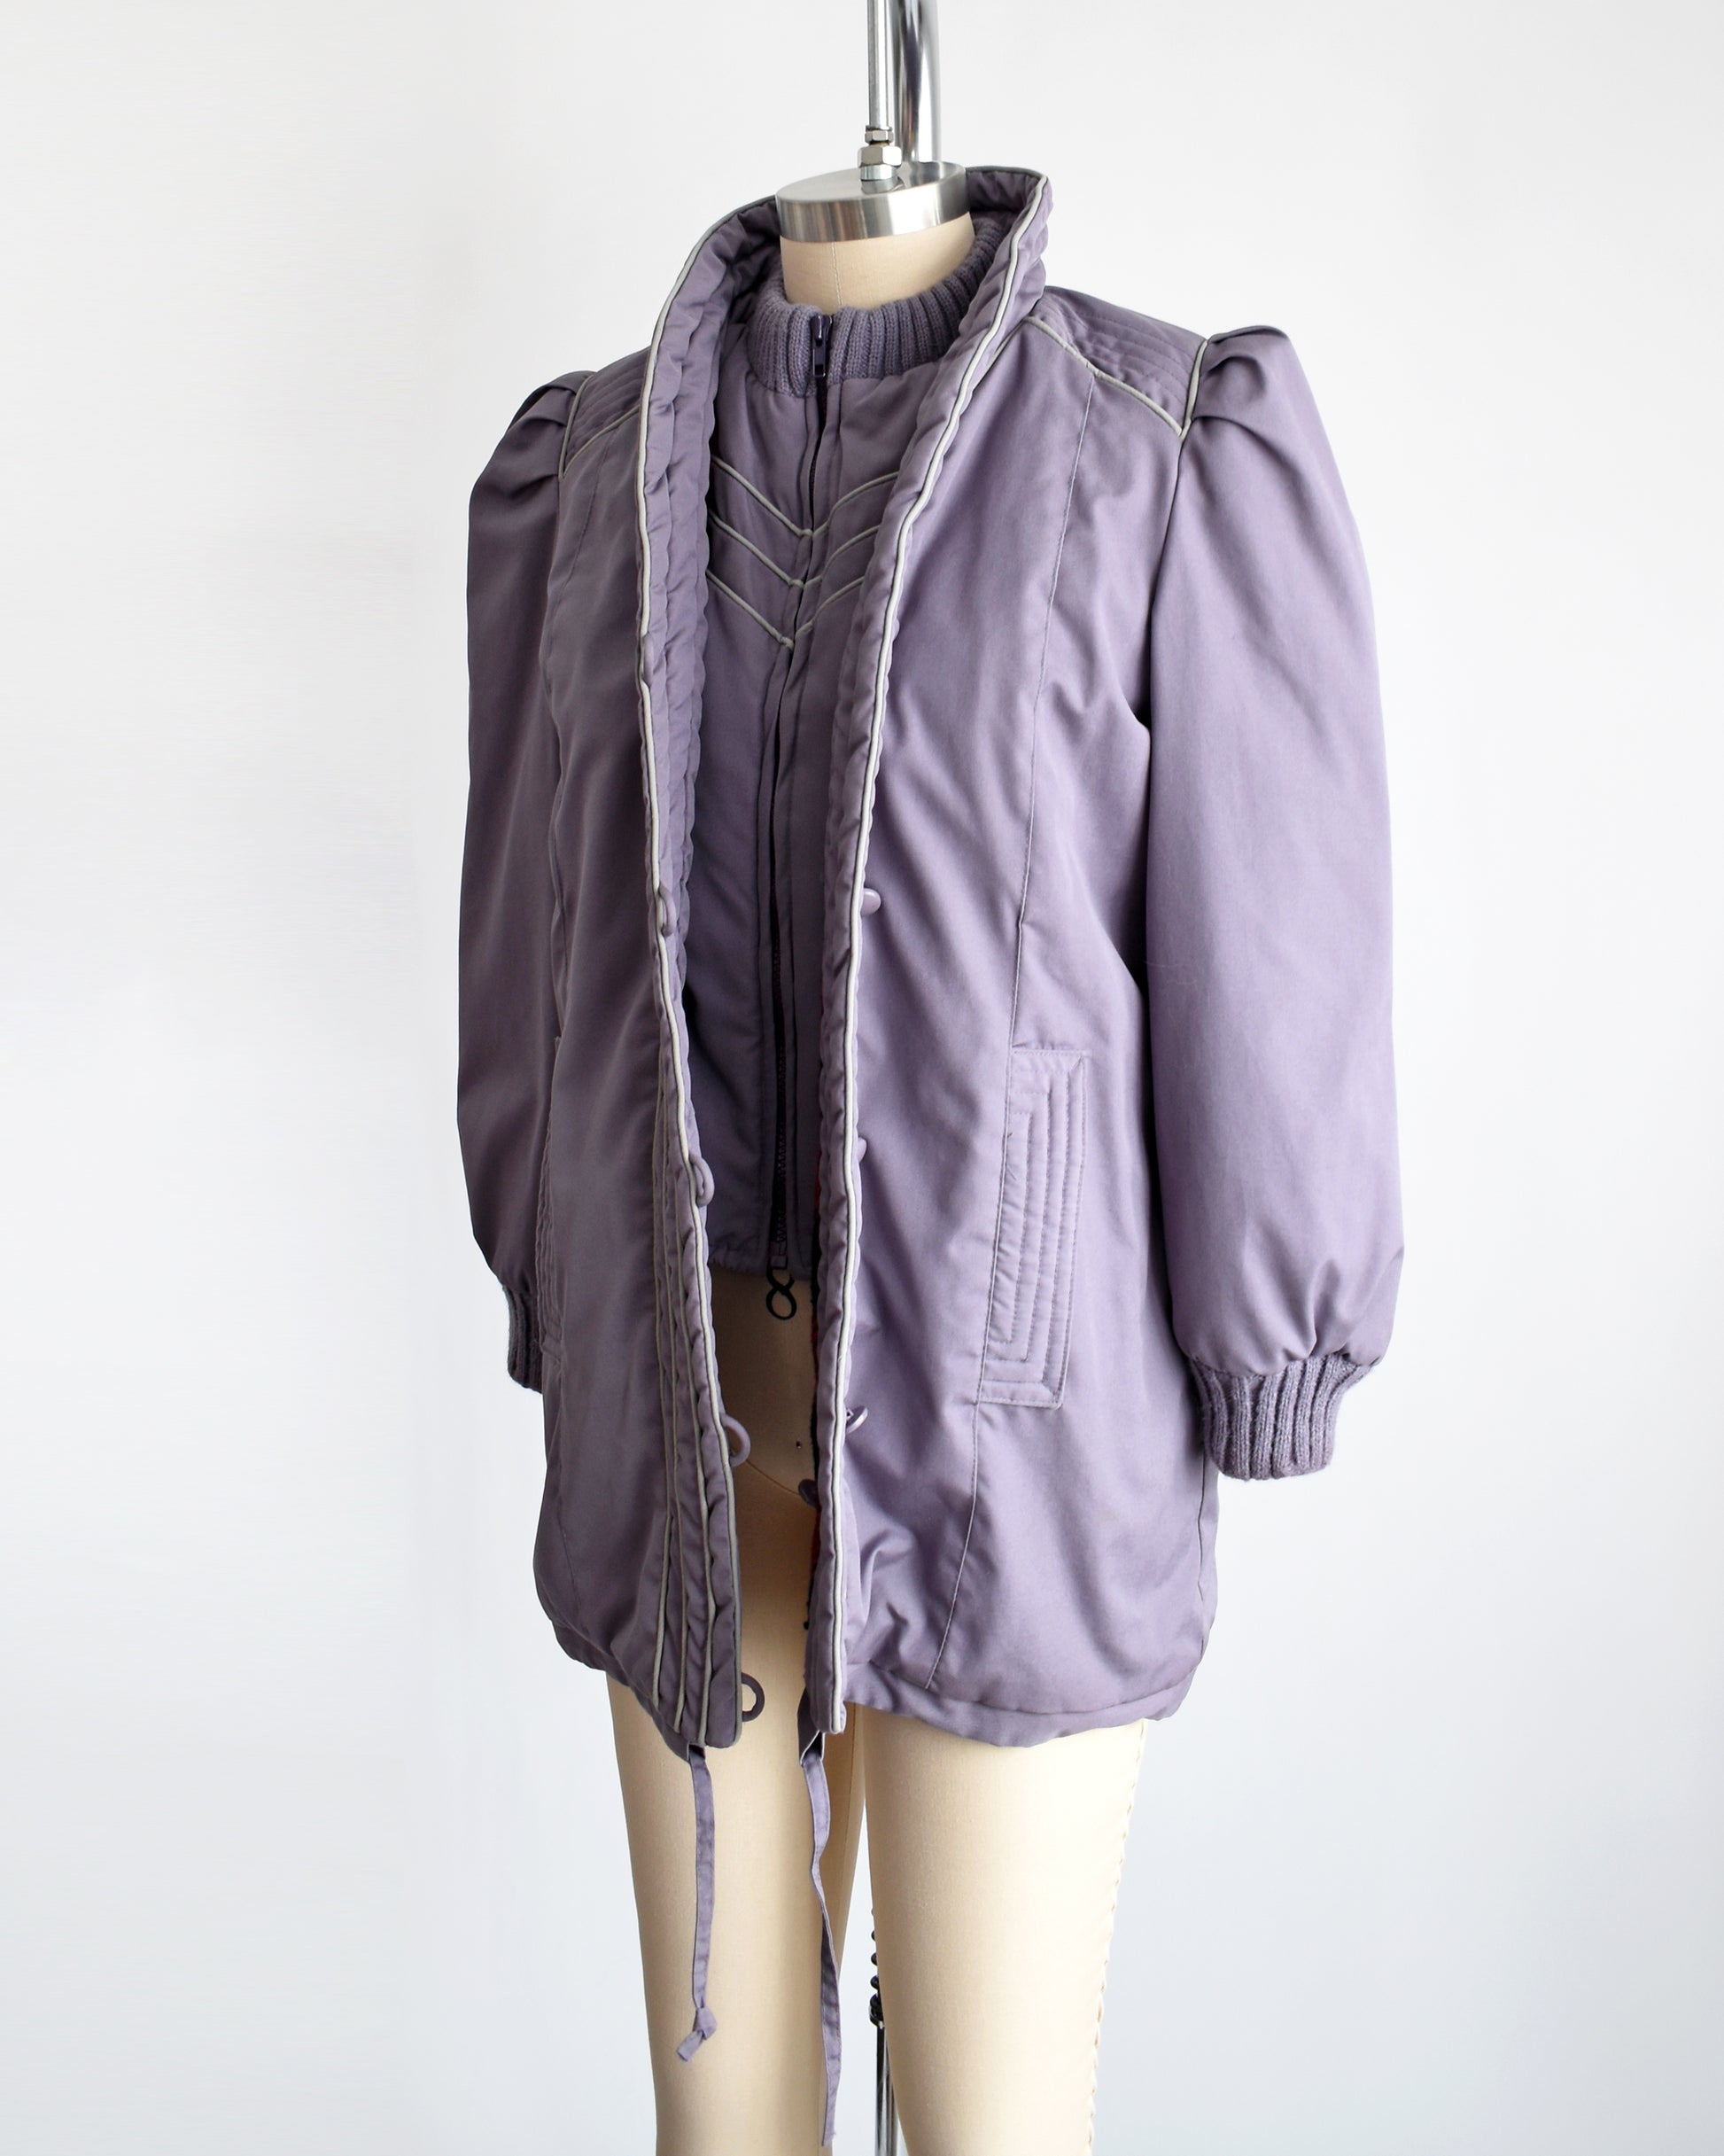   a vintage 1980s purple puffy coat with shawl style collar with gray trim. The coat is unbuttoned in this photo